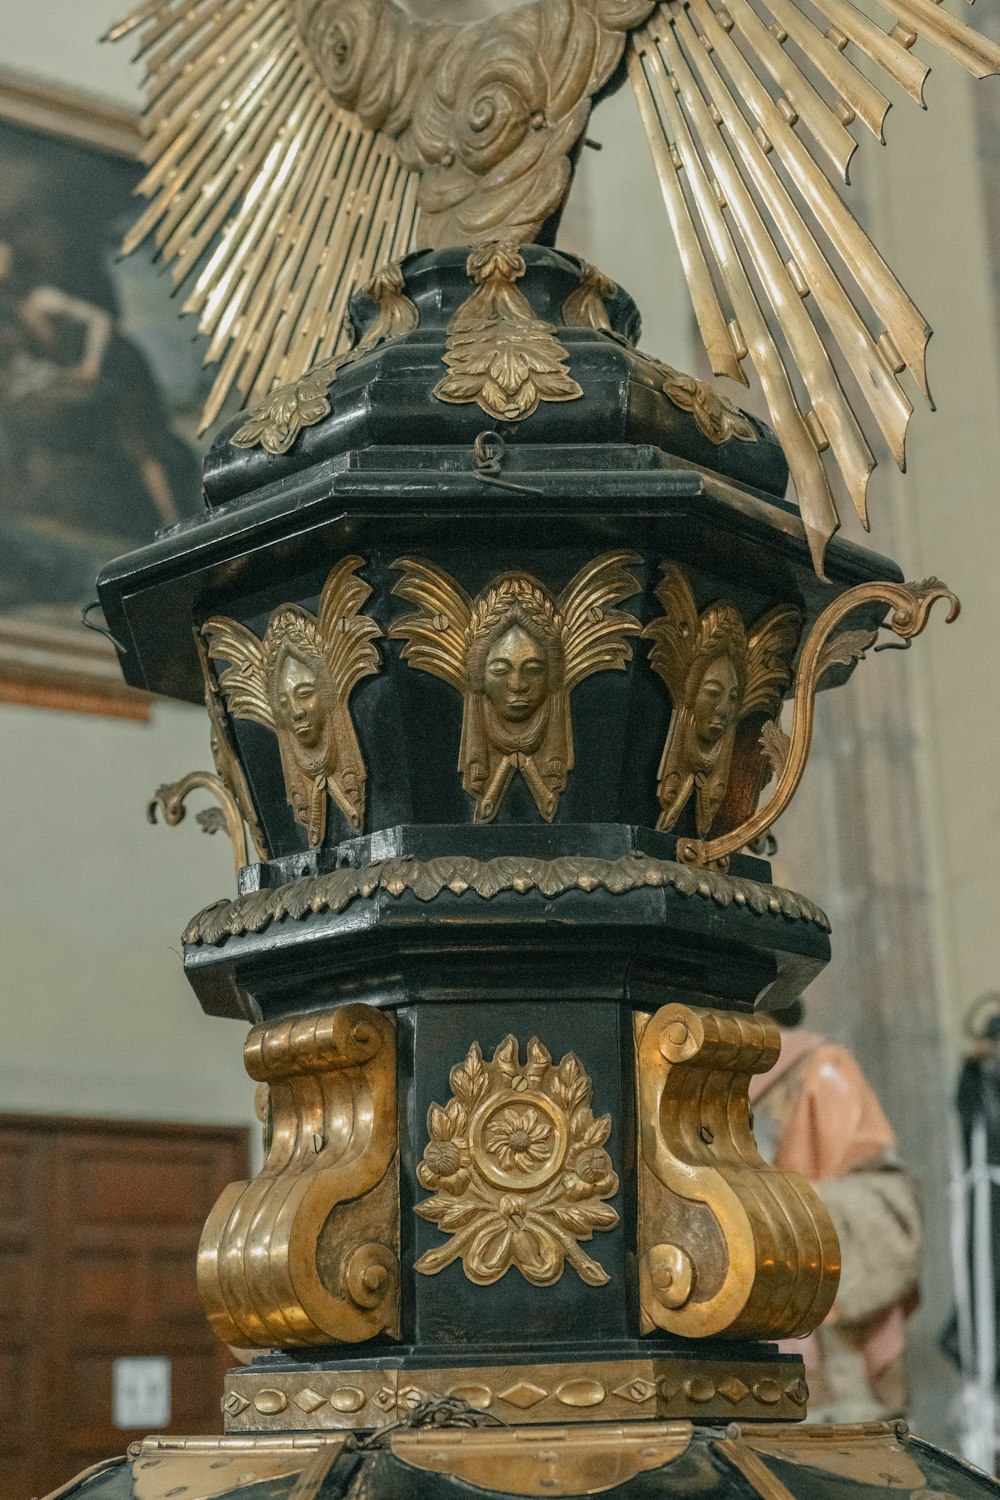 a statue of a bird on top of a table